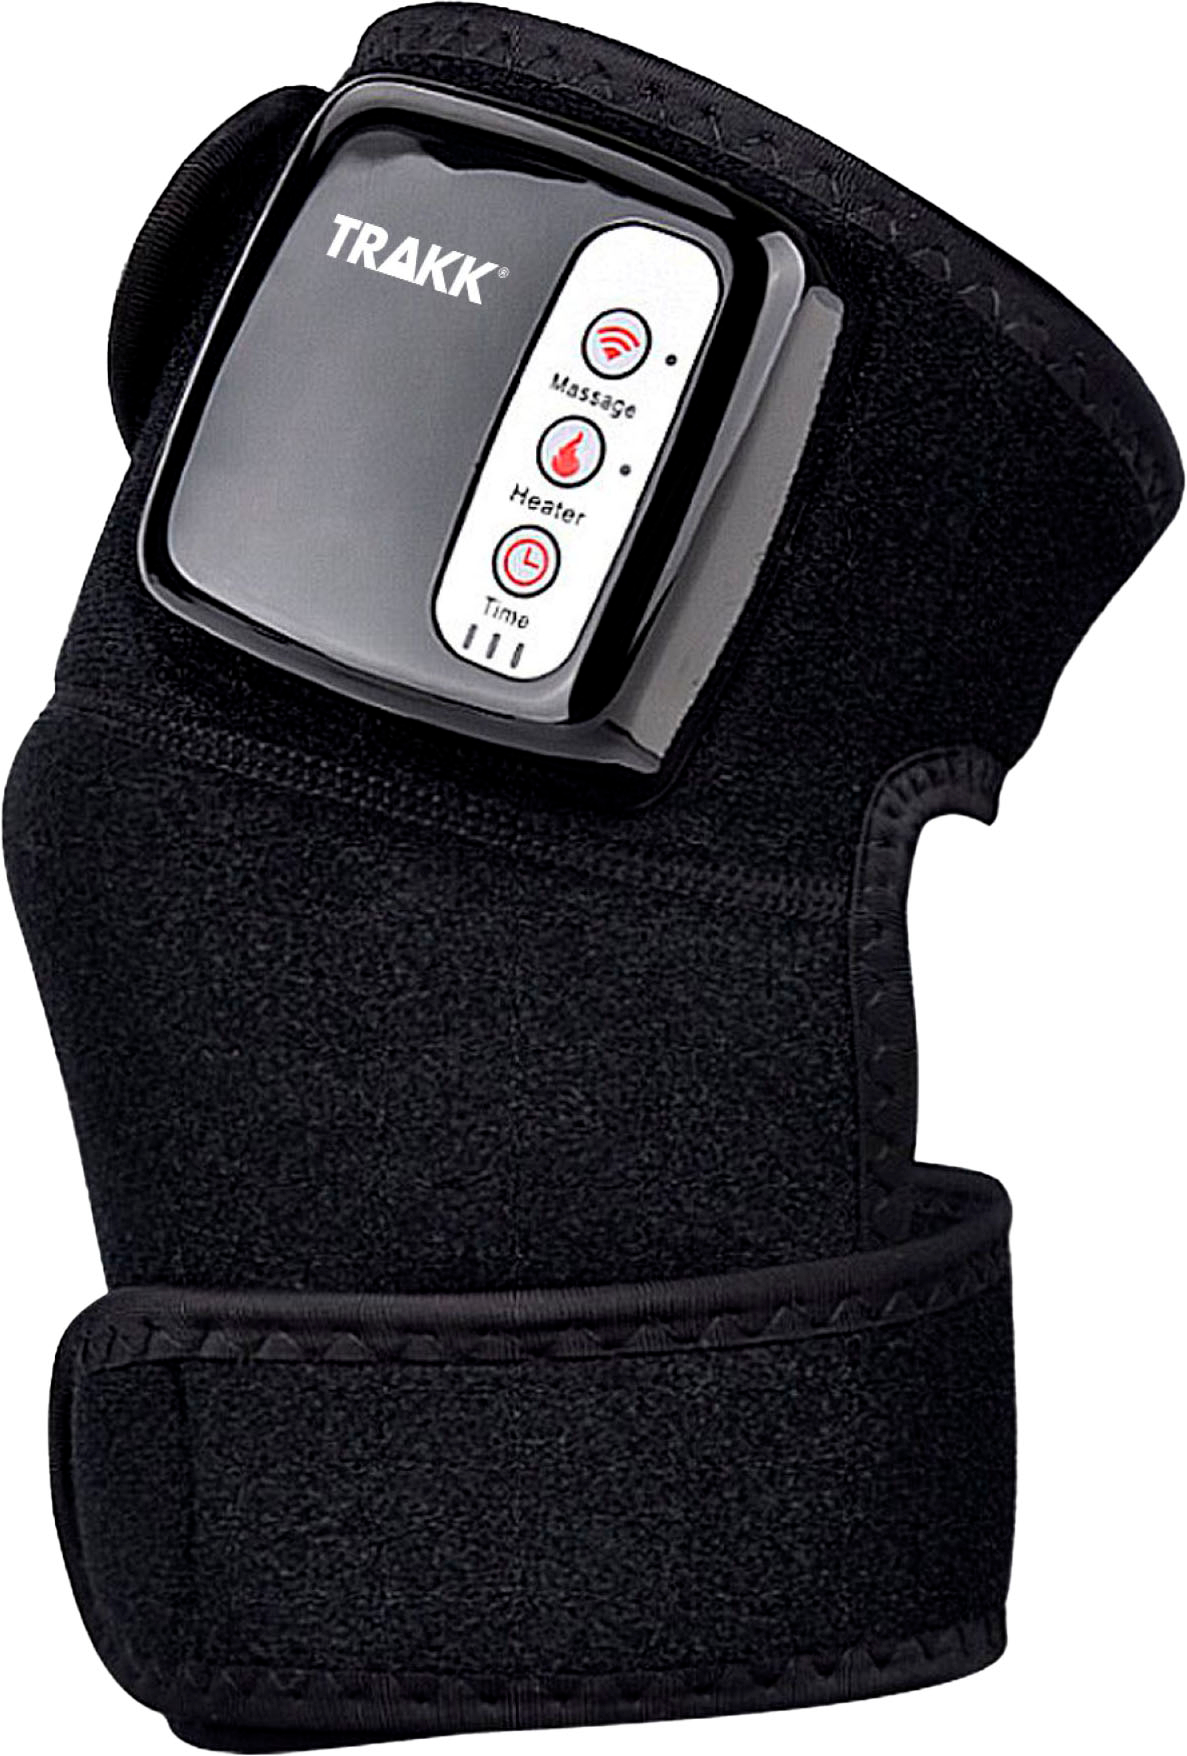 Massage Heating Knee Brace For Knee Pain Relief, Electric Heating